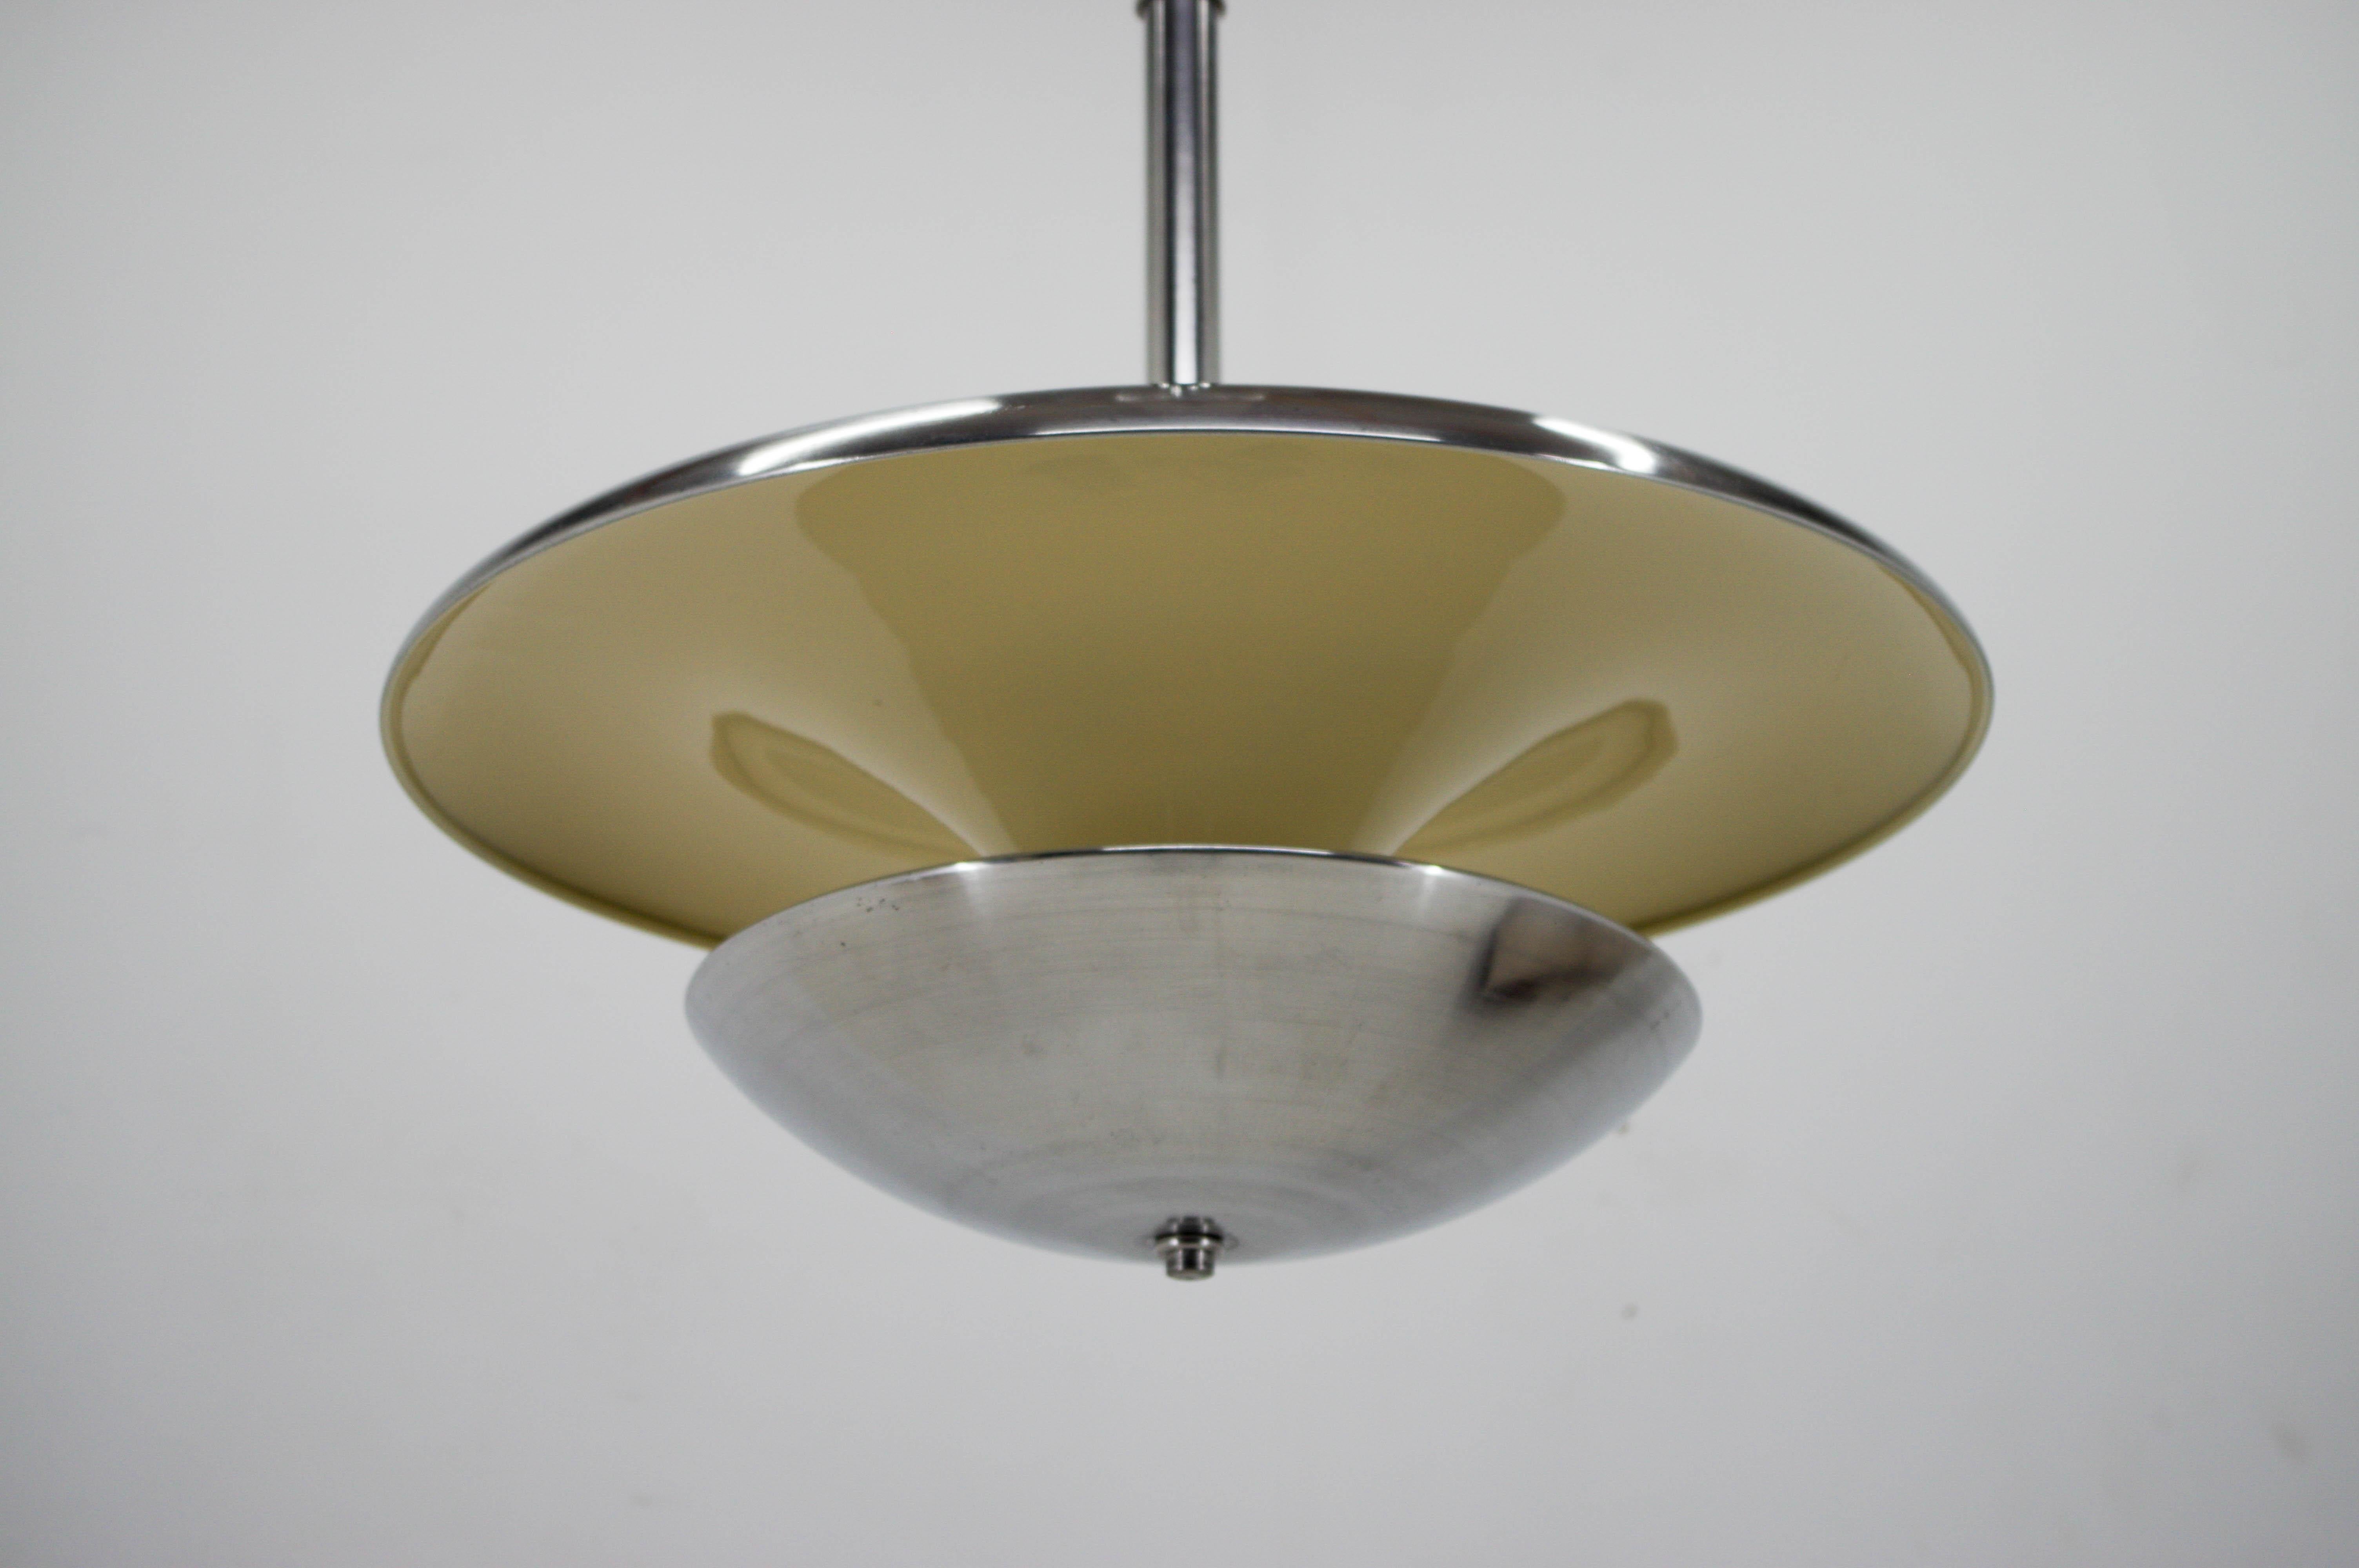 Czech Bauhaus Chandelier Made by IAS, 1930s, Two Items Available For Sale